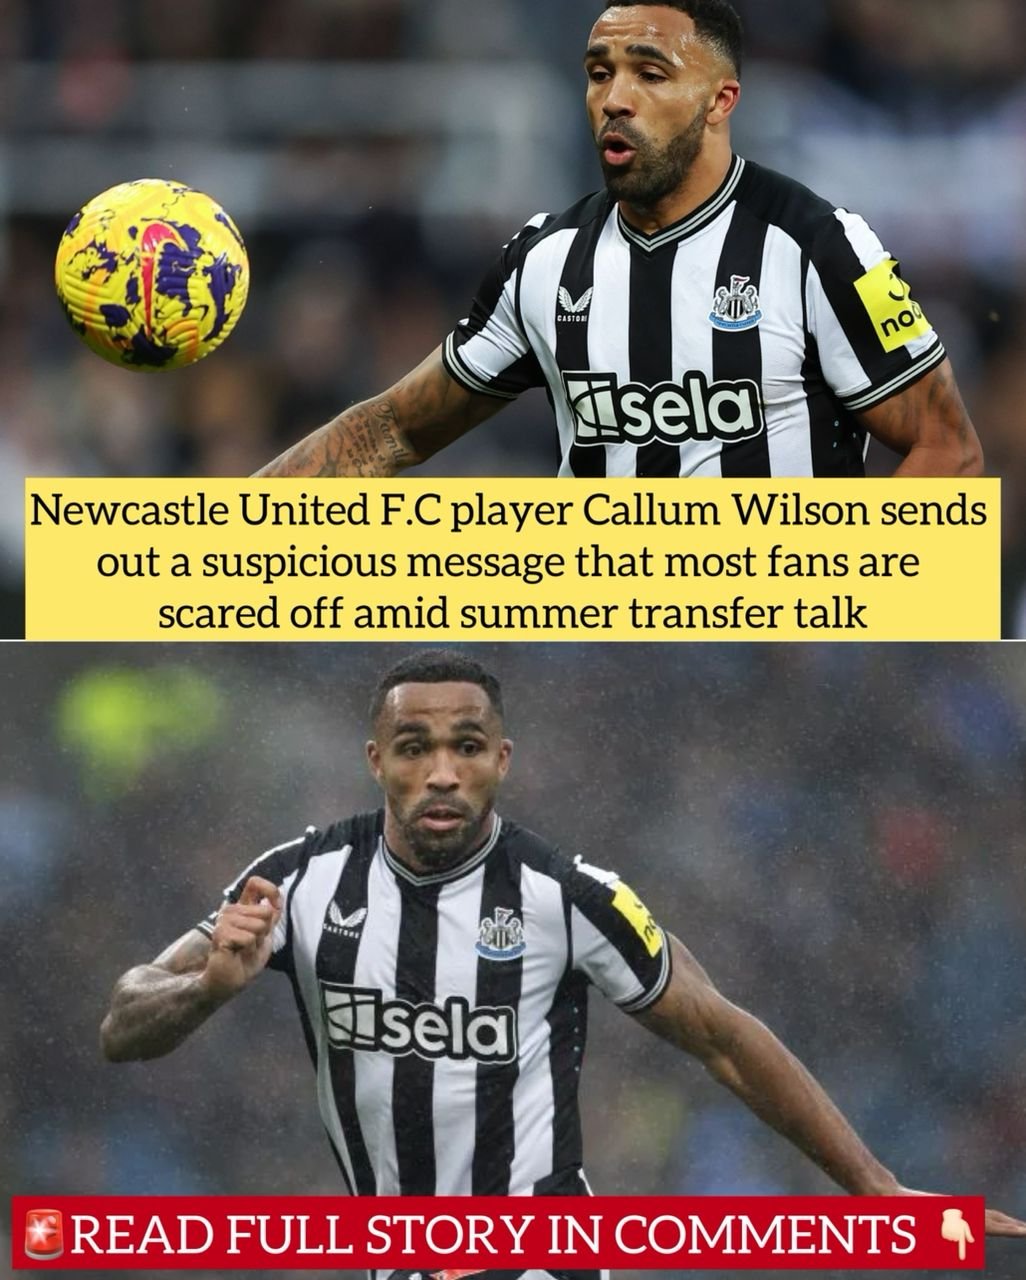 Newcastle United F.C player Callum Wilson sends out a suspicious message that most fans are scared off amid summer transfer talk